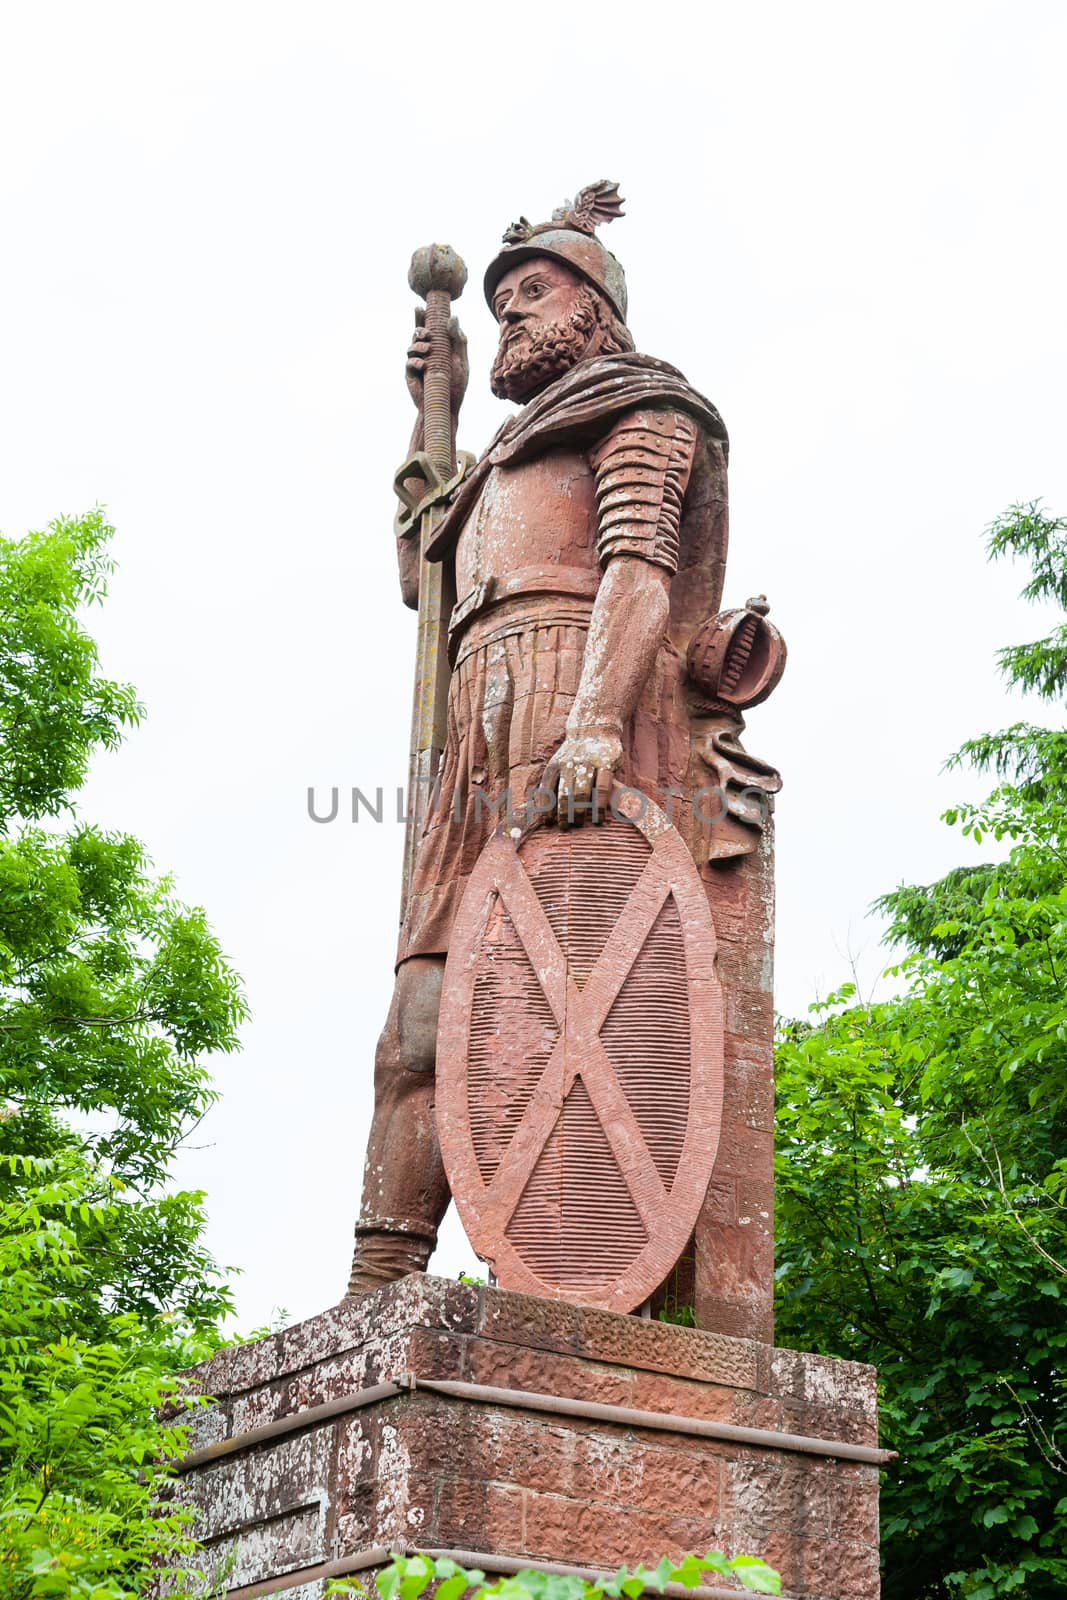 William Wallace was a Scottish knight and the red sandstone monument is located near Melrose in the Scottish Borders.